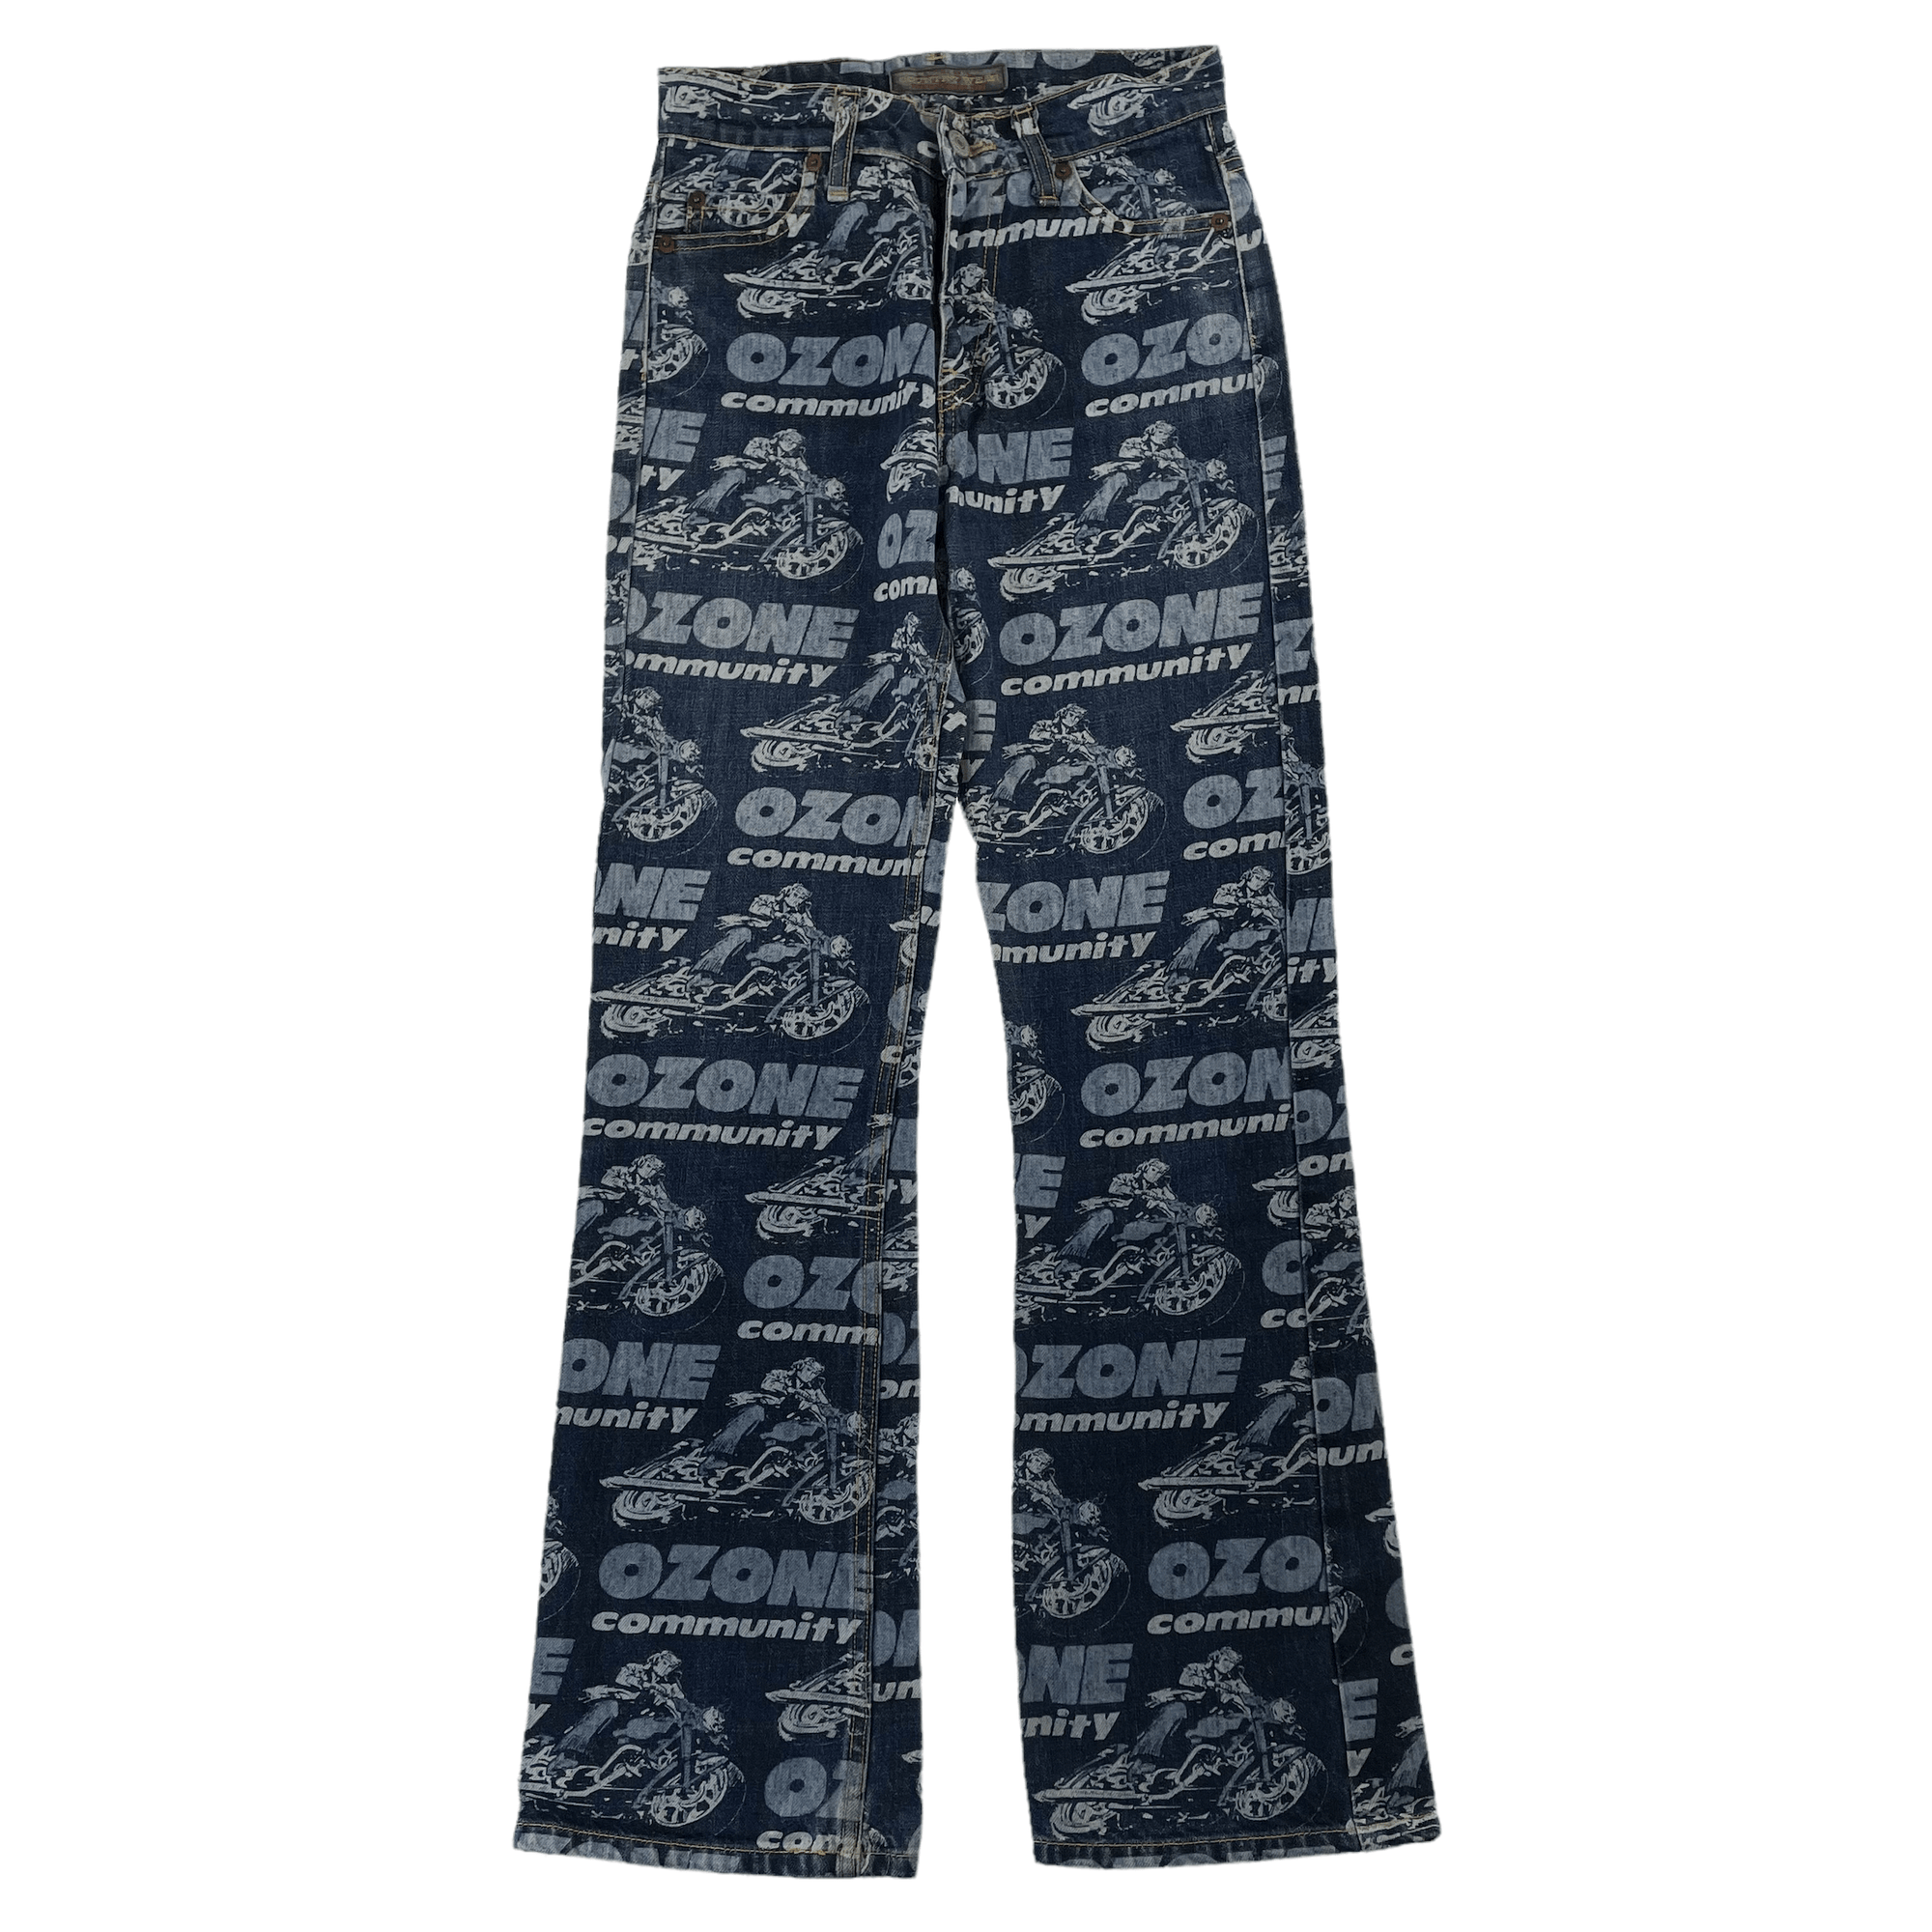 Vintage Hysteric Glamour Ozone Community al over print jeans